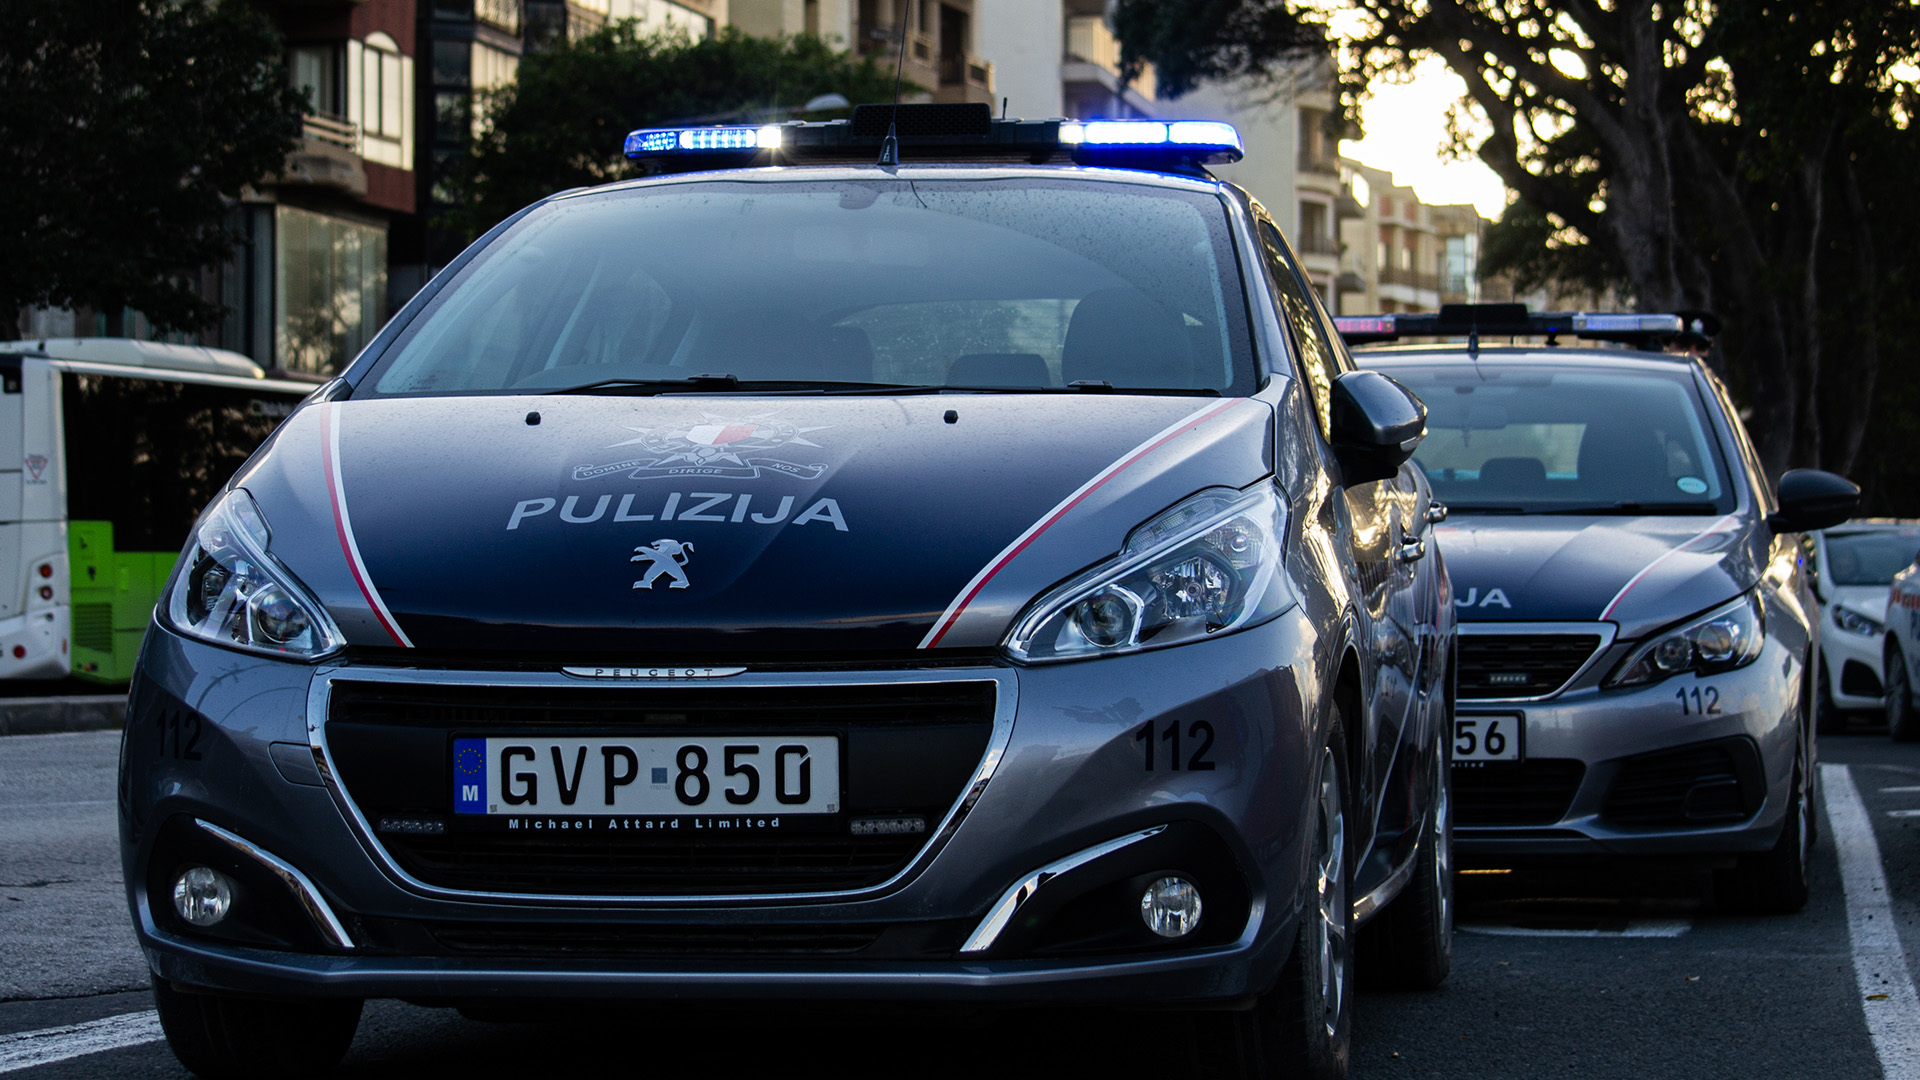 Teen arrested after hold-up in Qormi